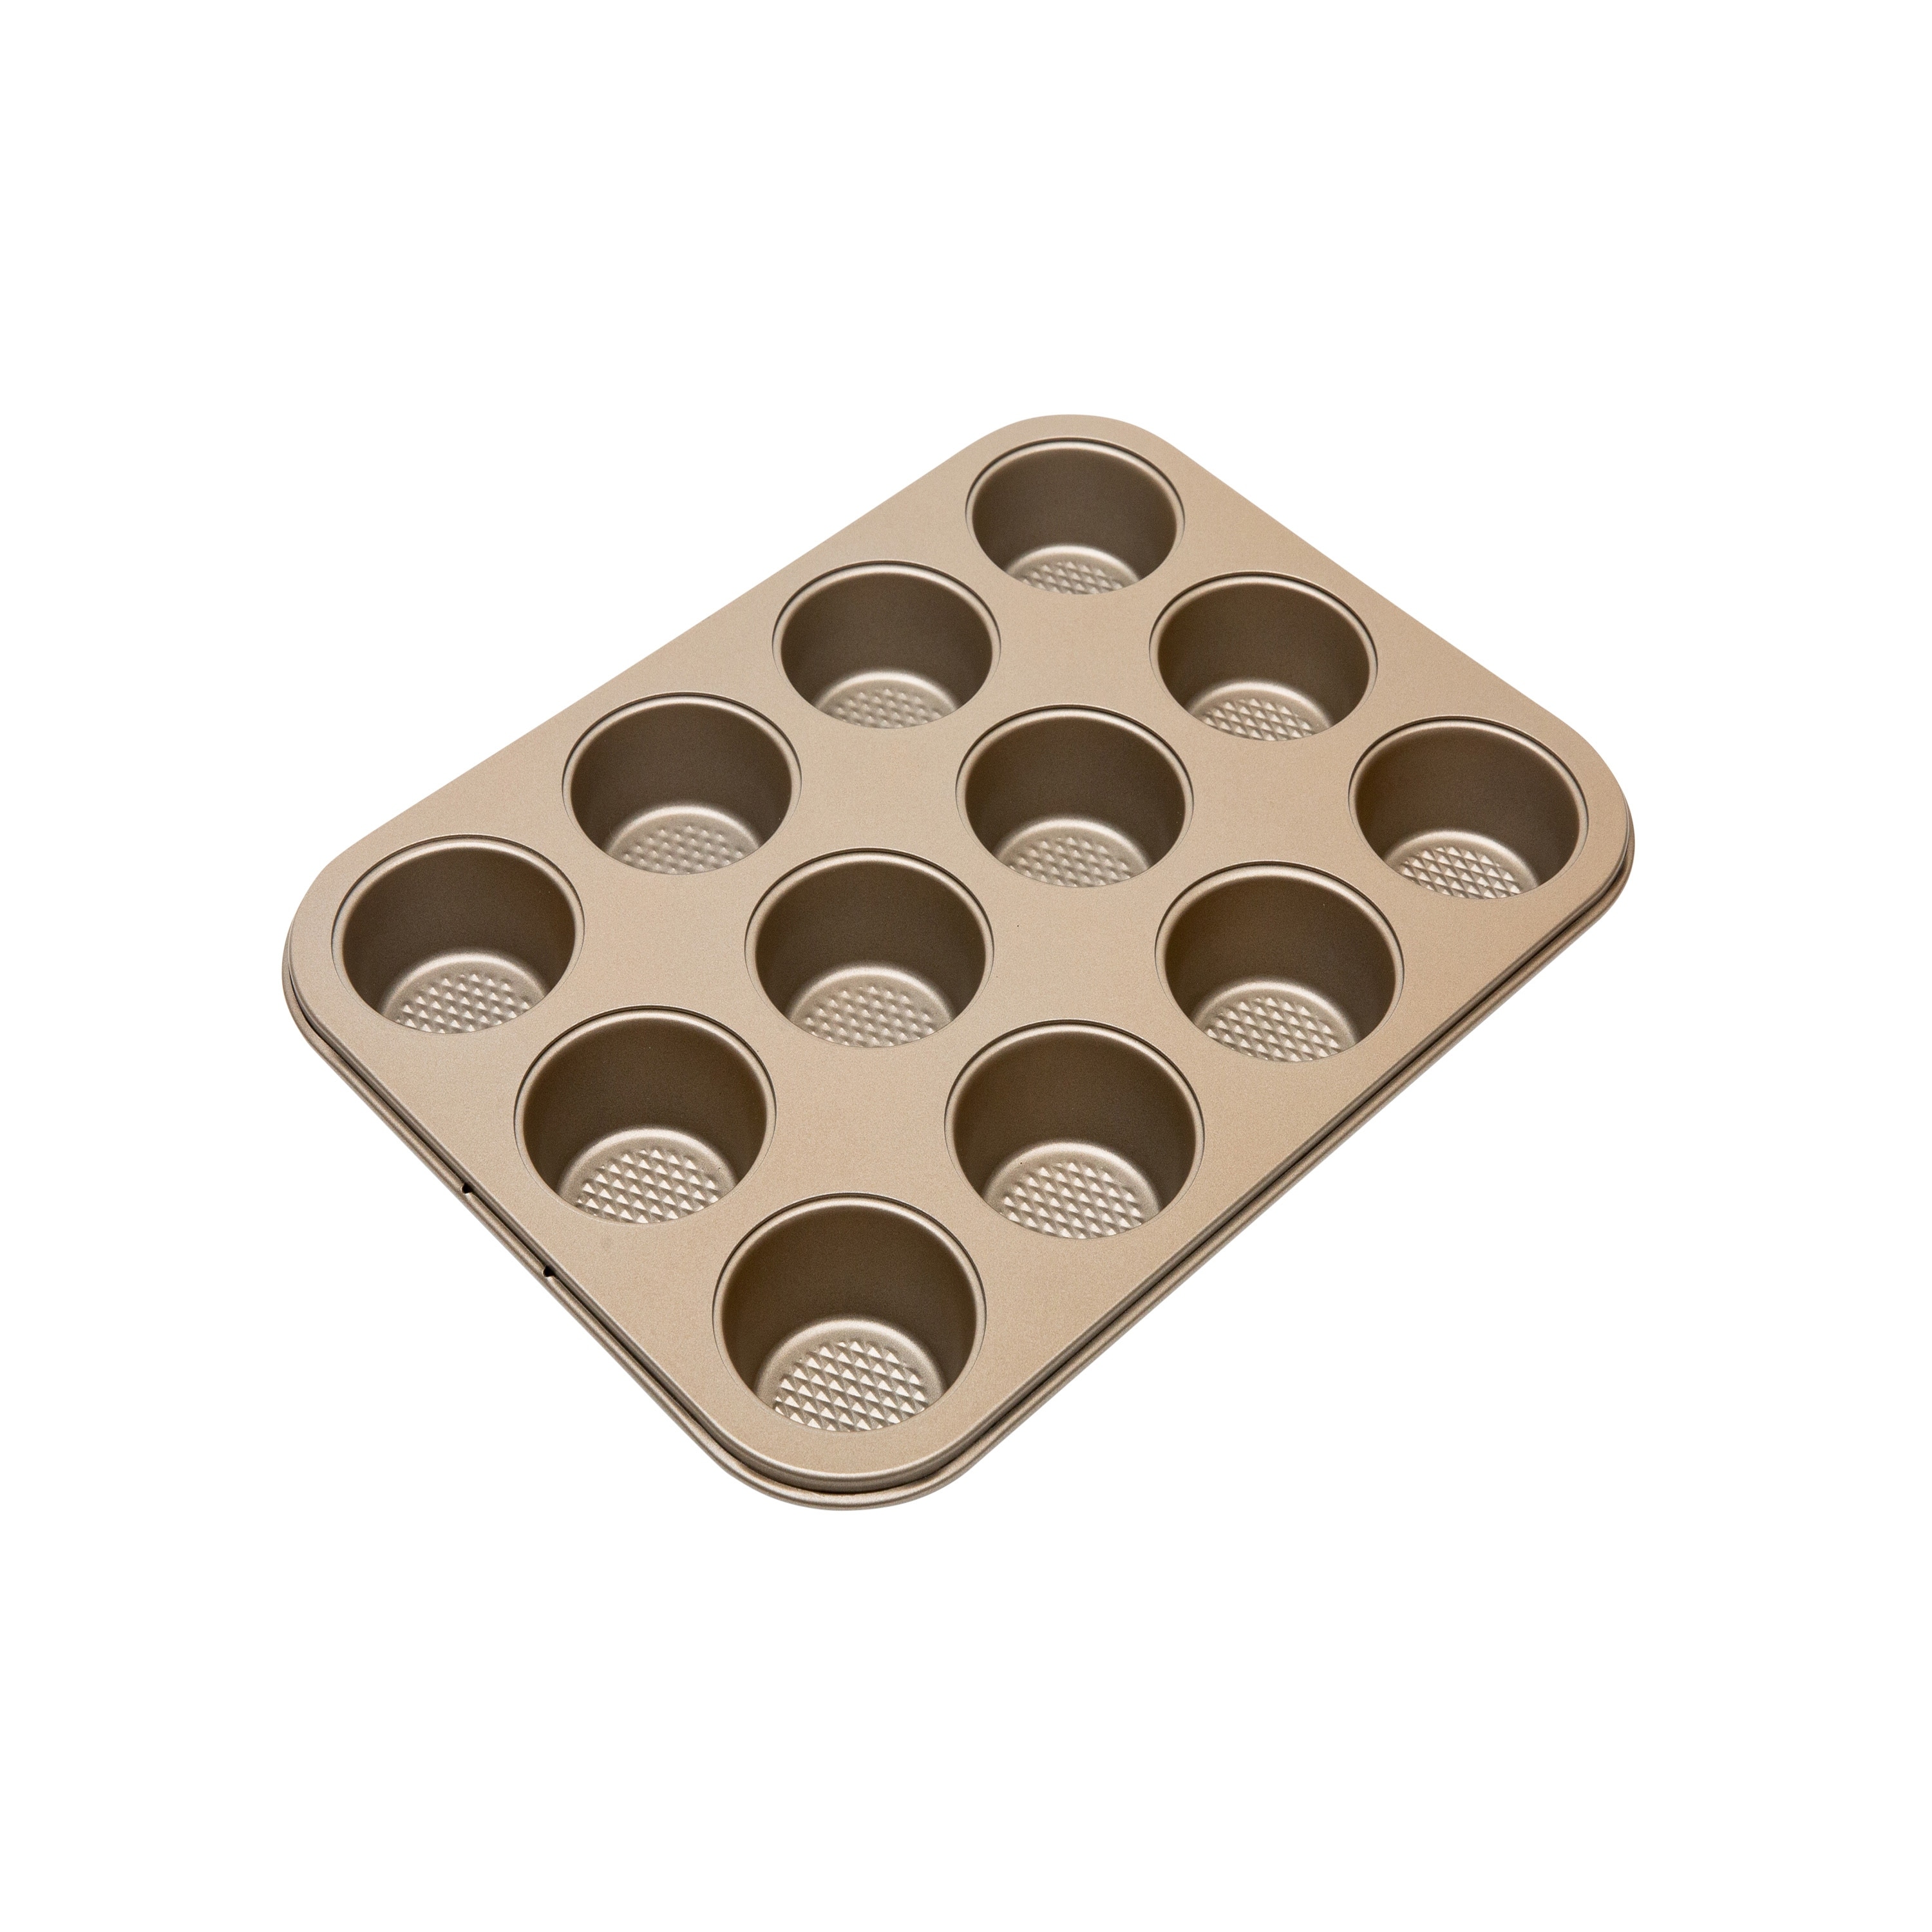 Rachael Ray Nonstick Bakeware 12-Cup Muffin and Cupcake Pan - Bed